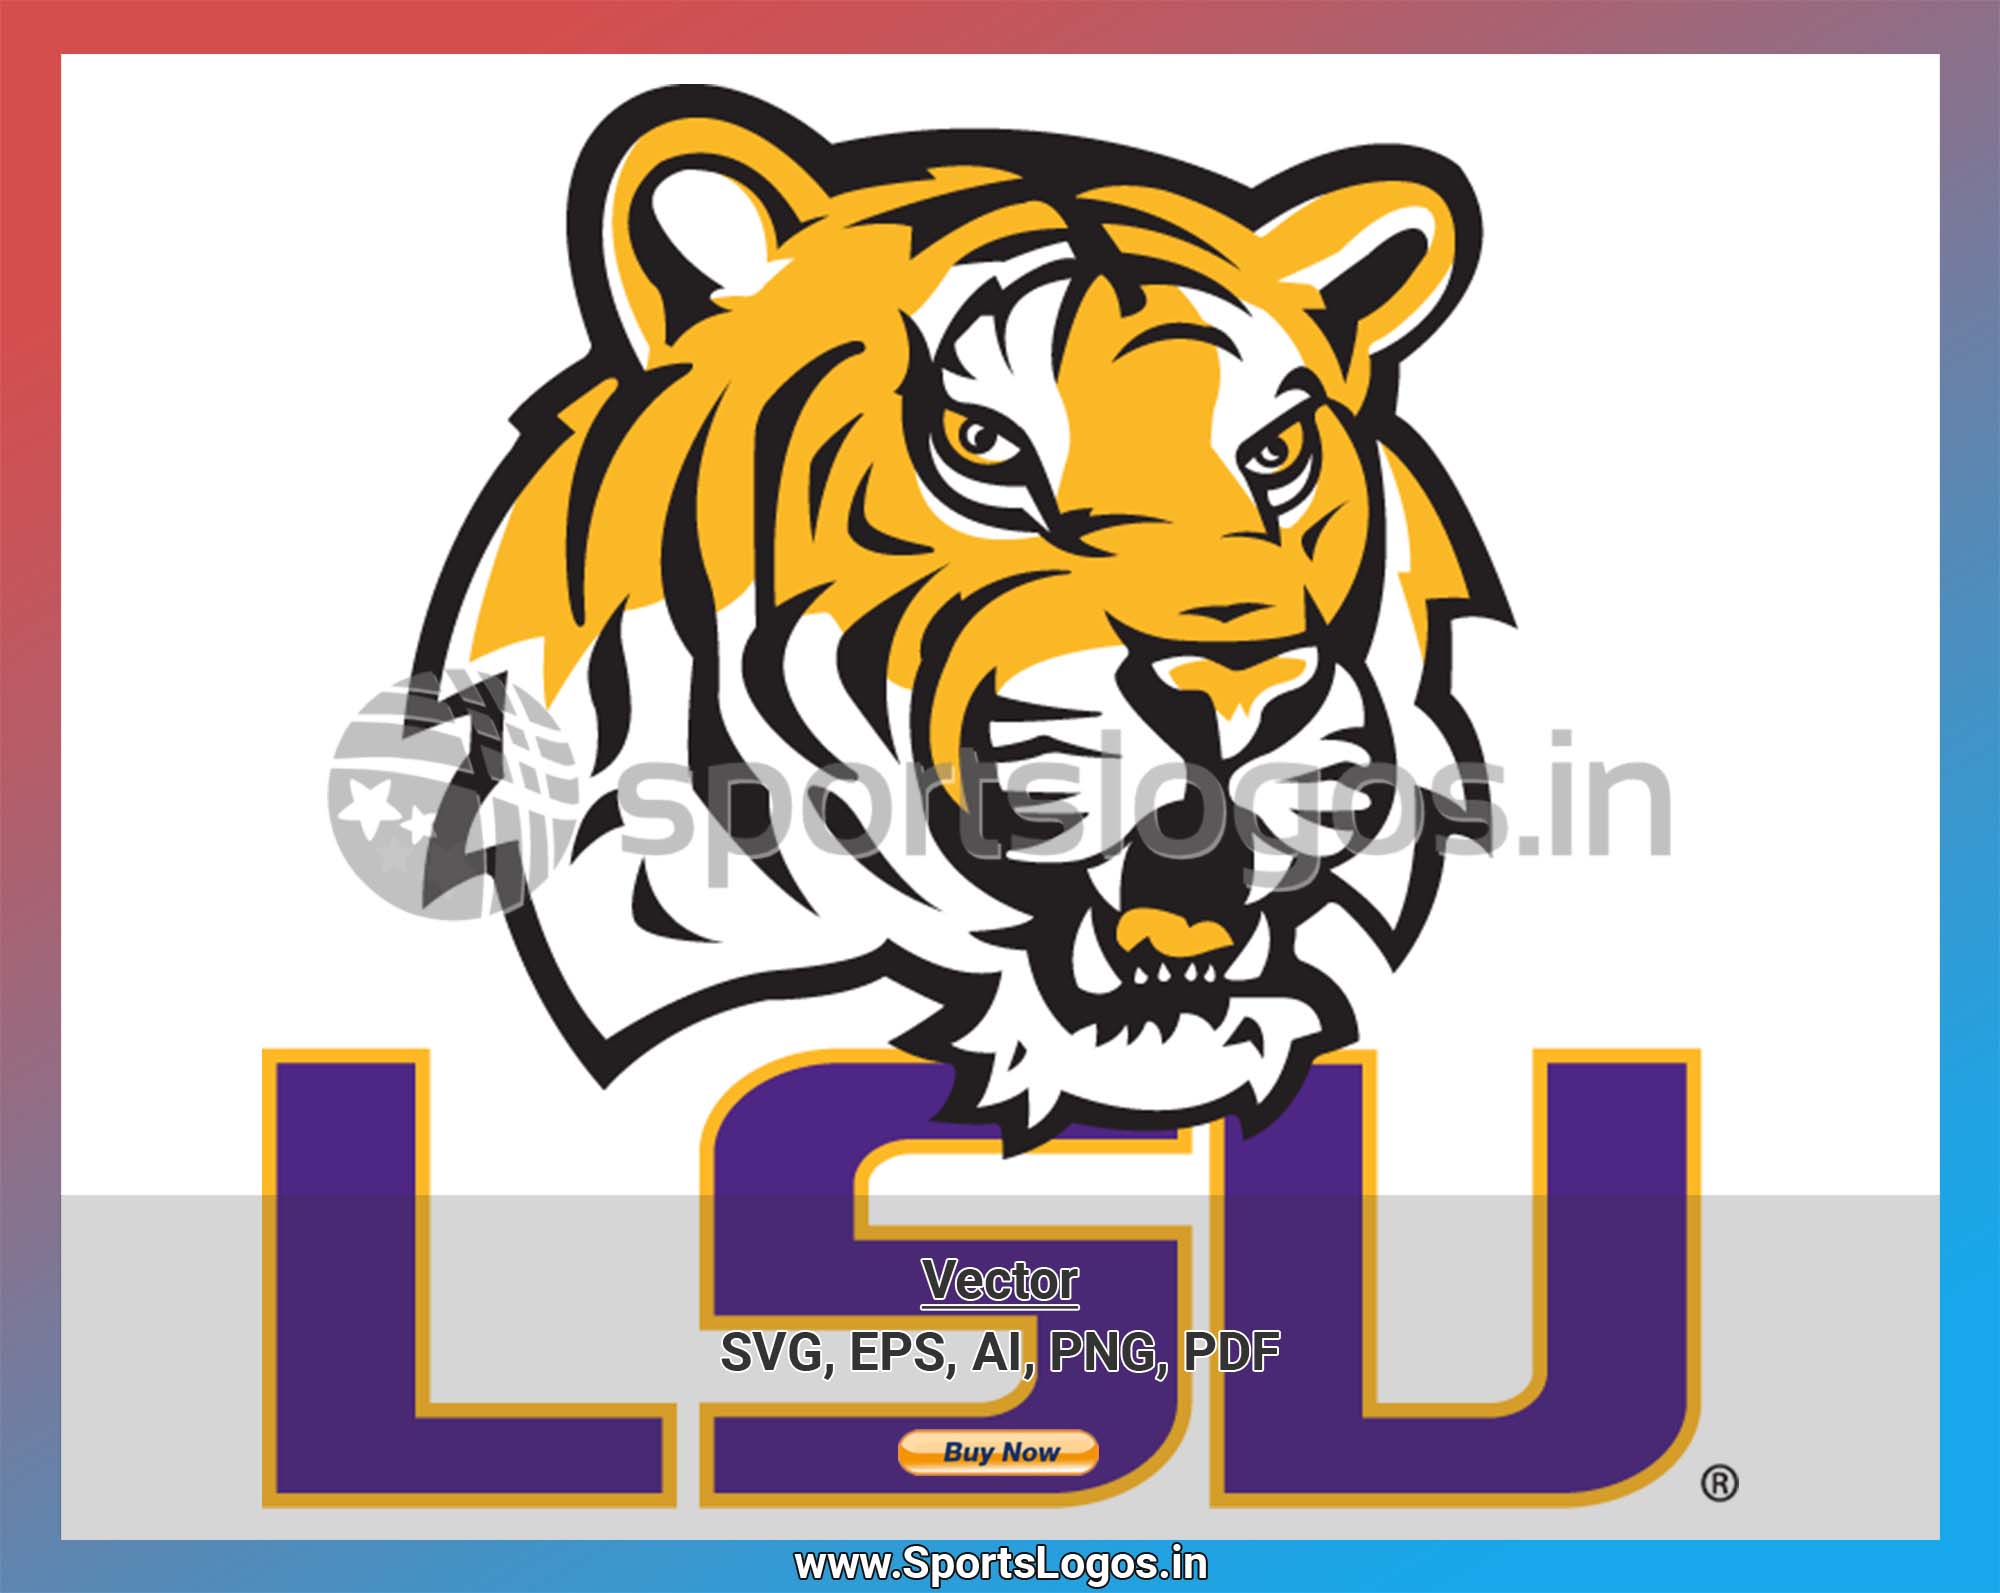 Download Lsu Tigers College Sports Vector Svg Logo In 5 Formats Spln002484 Sports Logos Embroidery Vector For Nfl Nba Nhl Mlb Milb And More